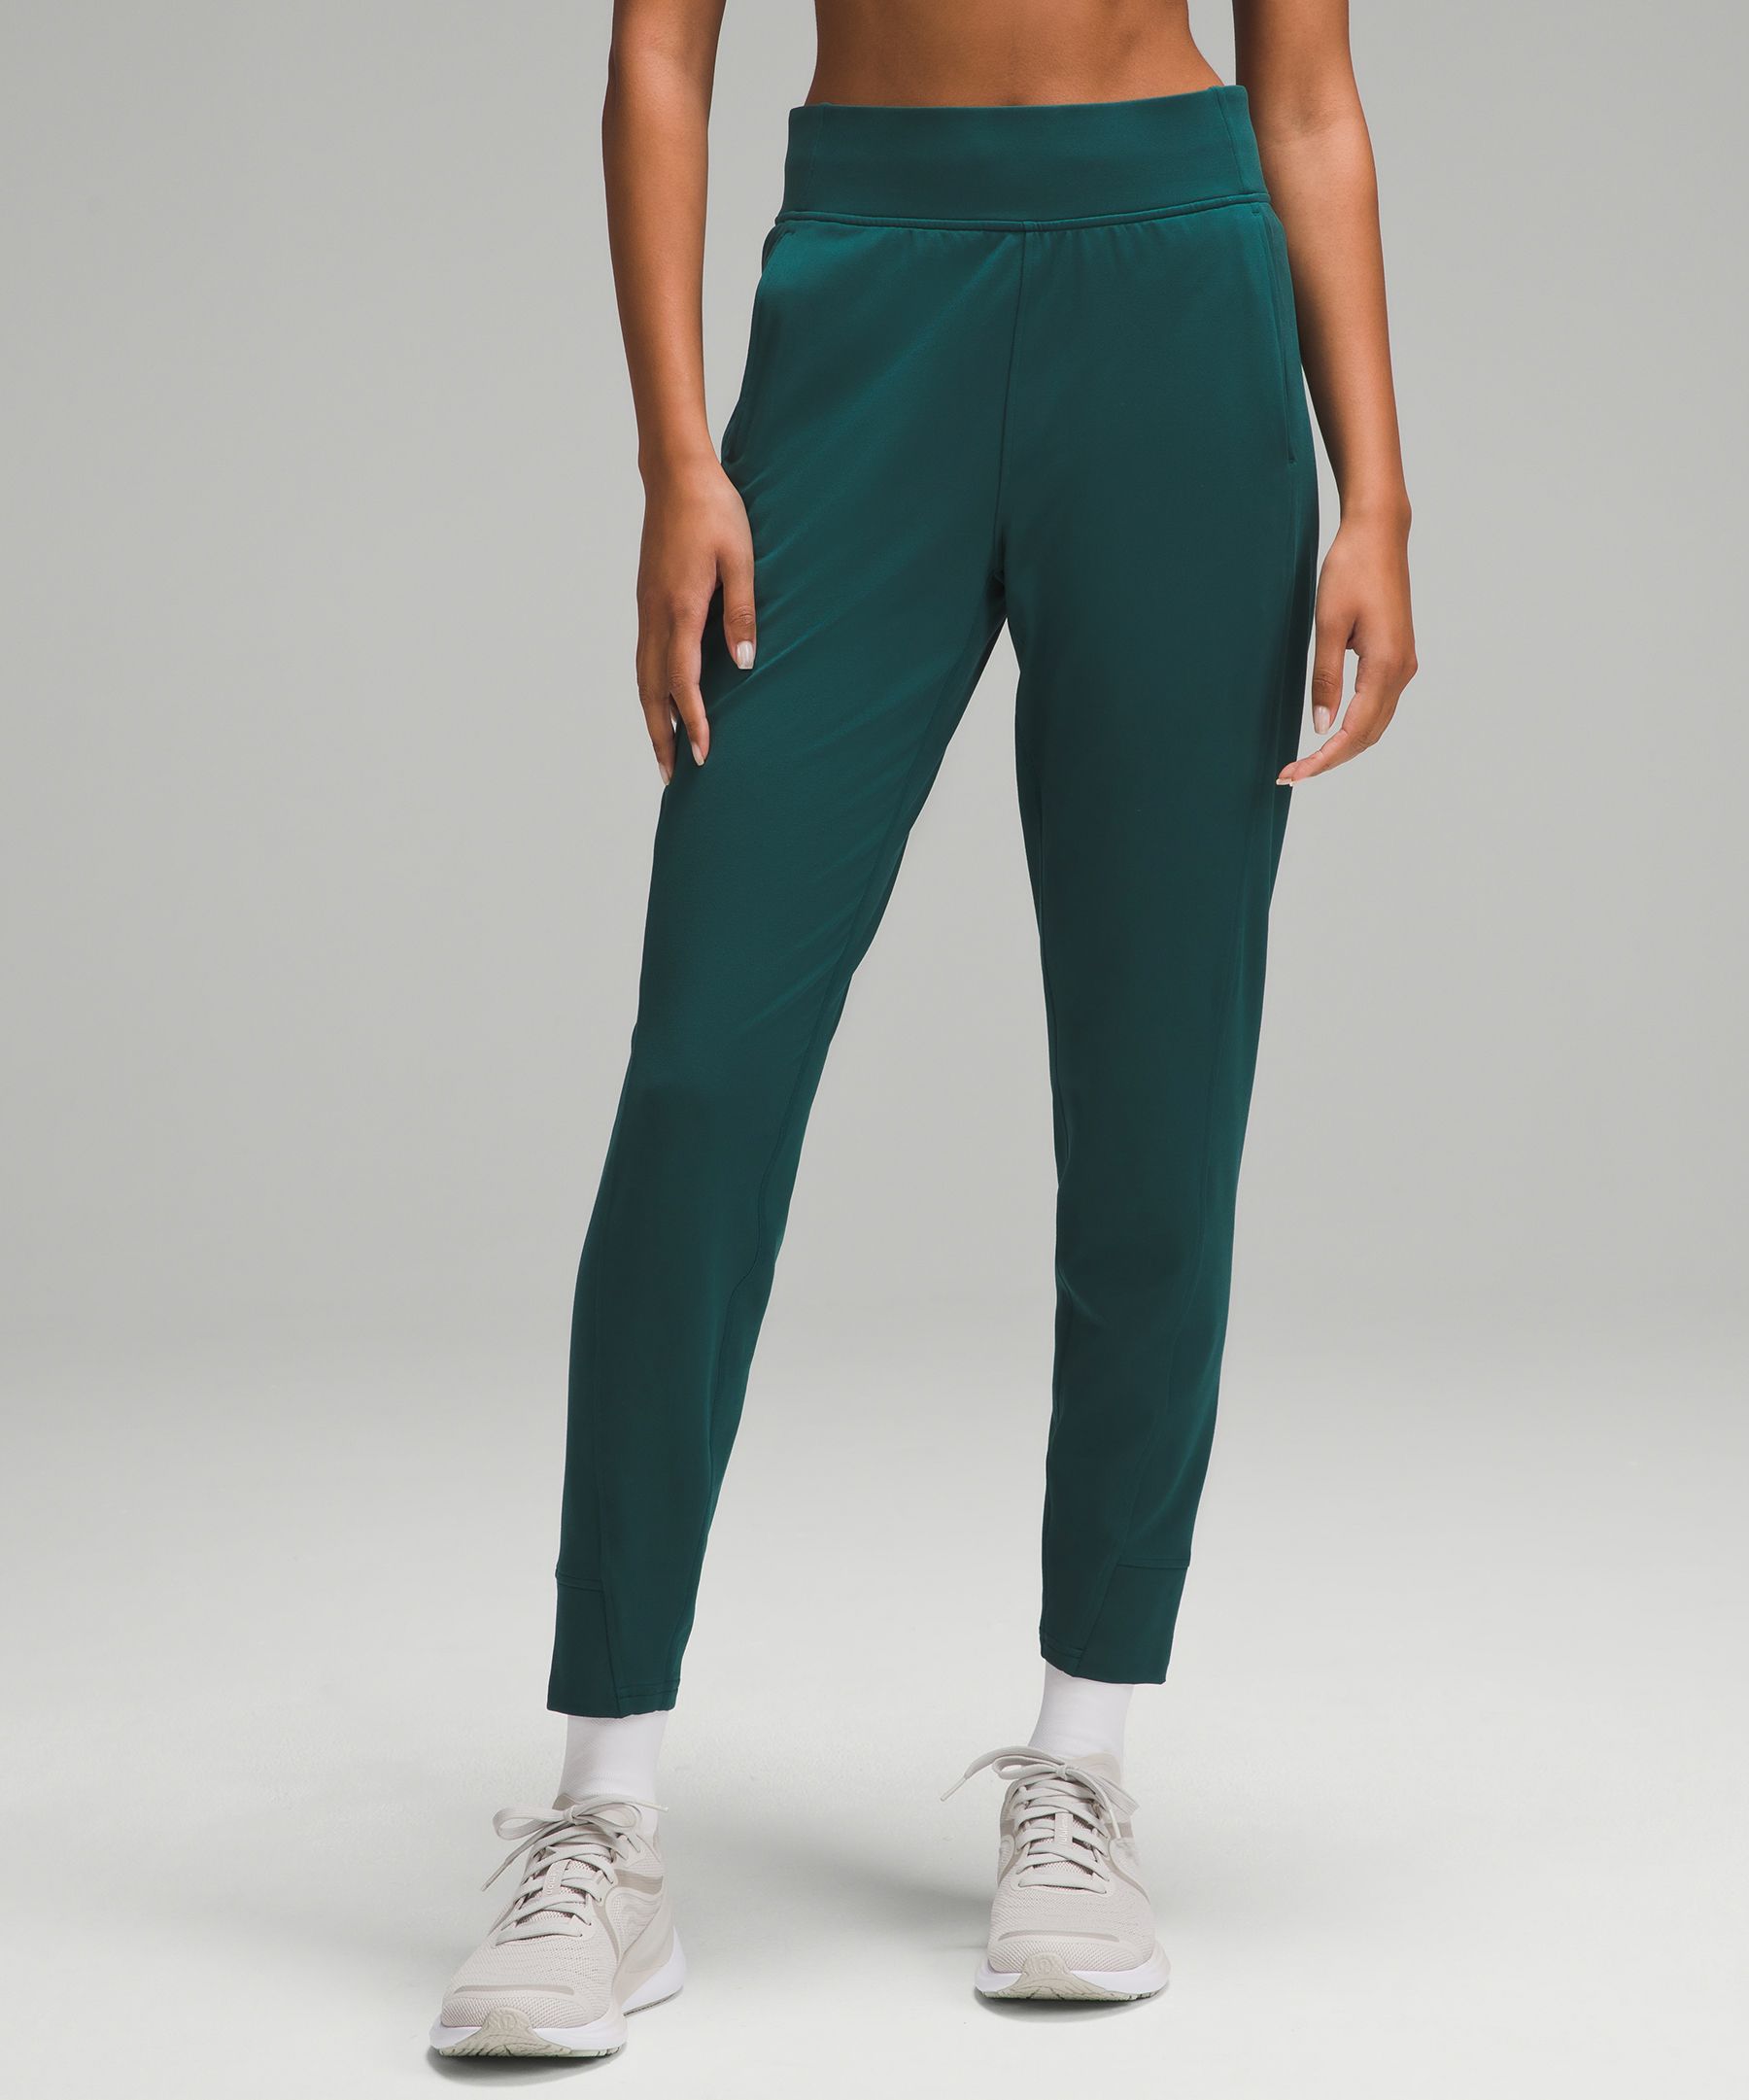 Lululemon Stretch High-Rise Jogger Full-Length Green Size 10 - $53 (55% Off  Retail) - From Evelyn